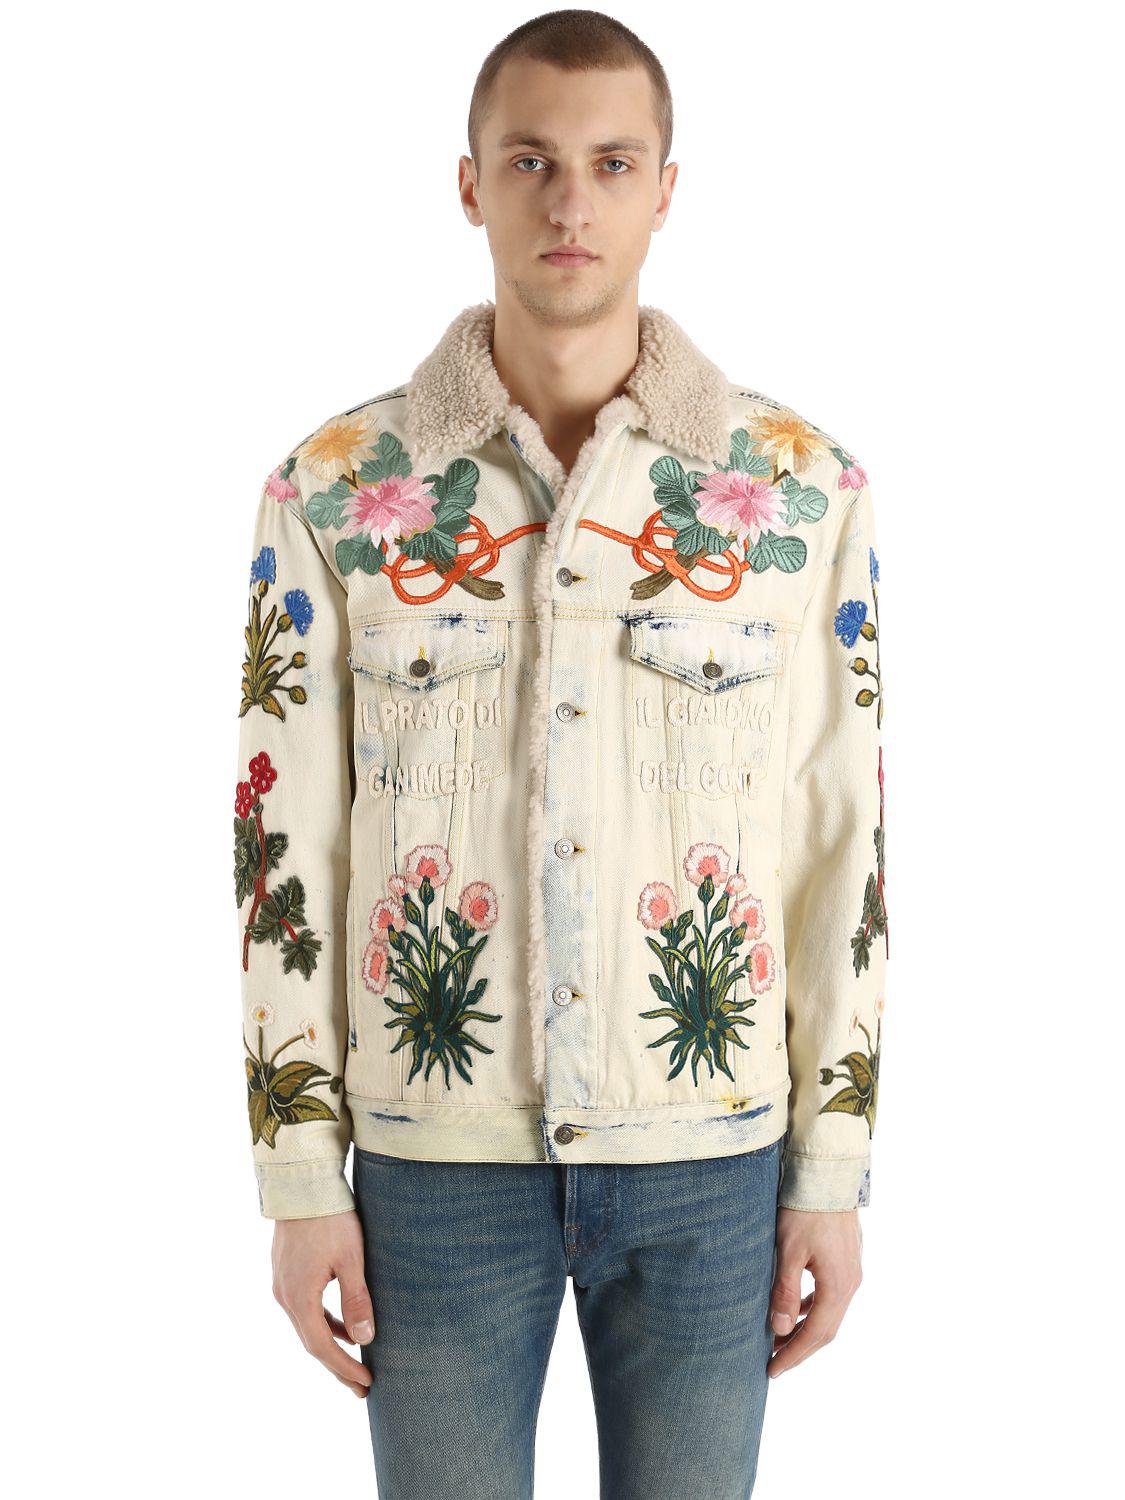 Gucci Embroidered Patch Shearling Denim Jacket in Light Blue for Men